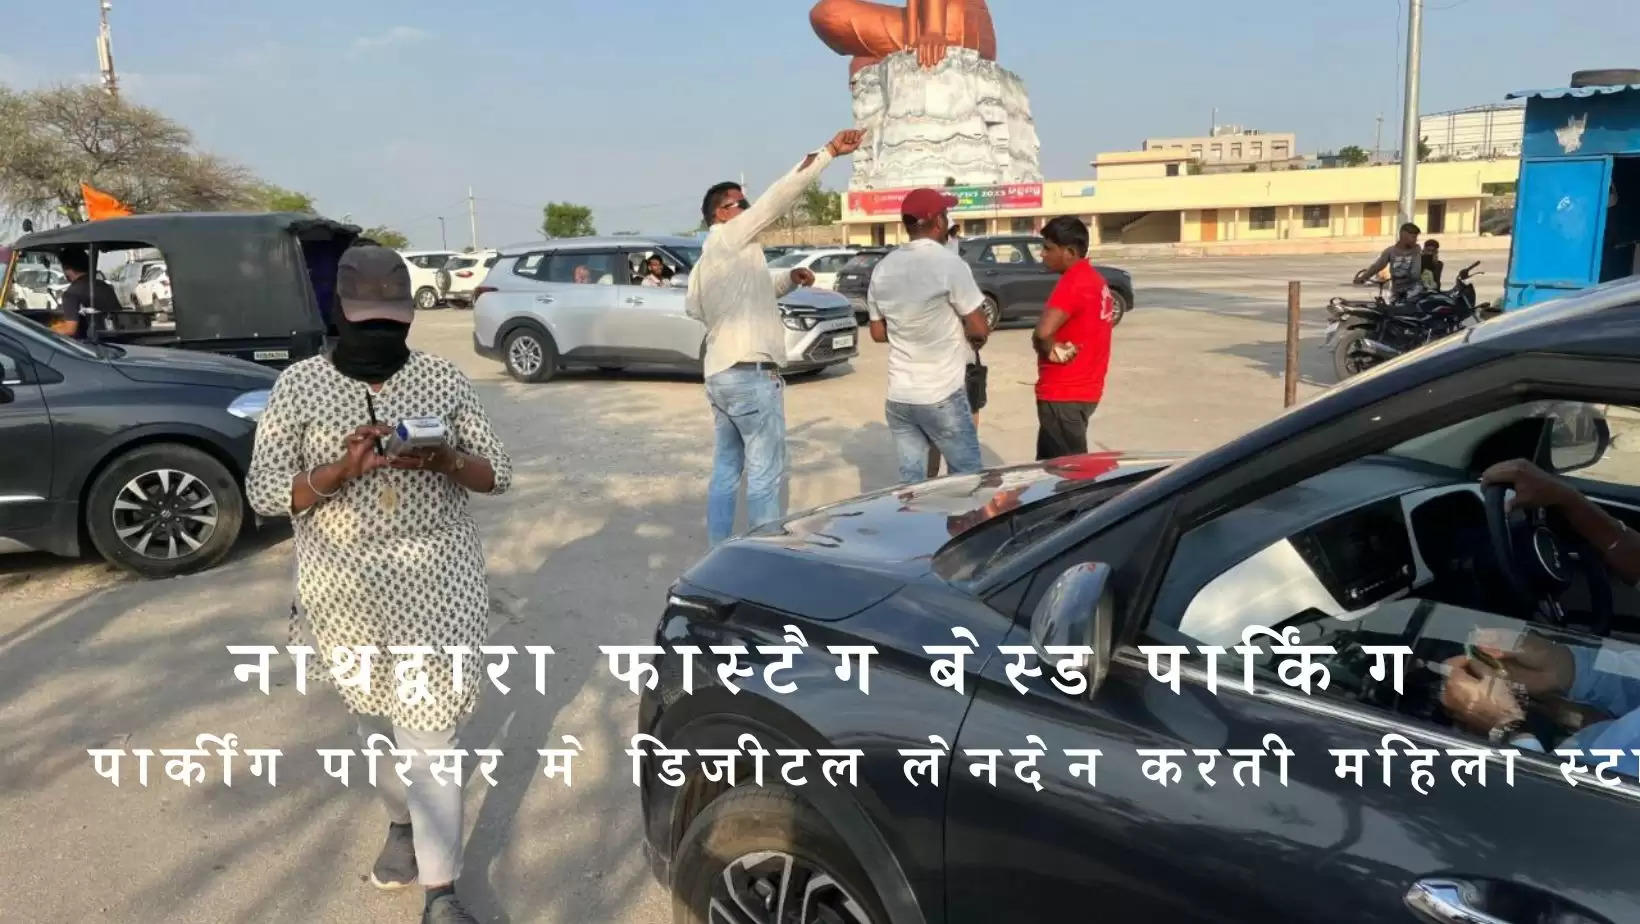 Nathdwara - Udaipur divisions first Fastag Based Parking opens in Nathdwara